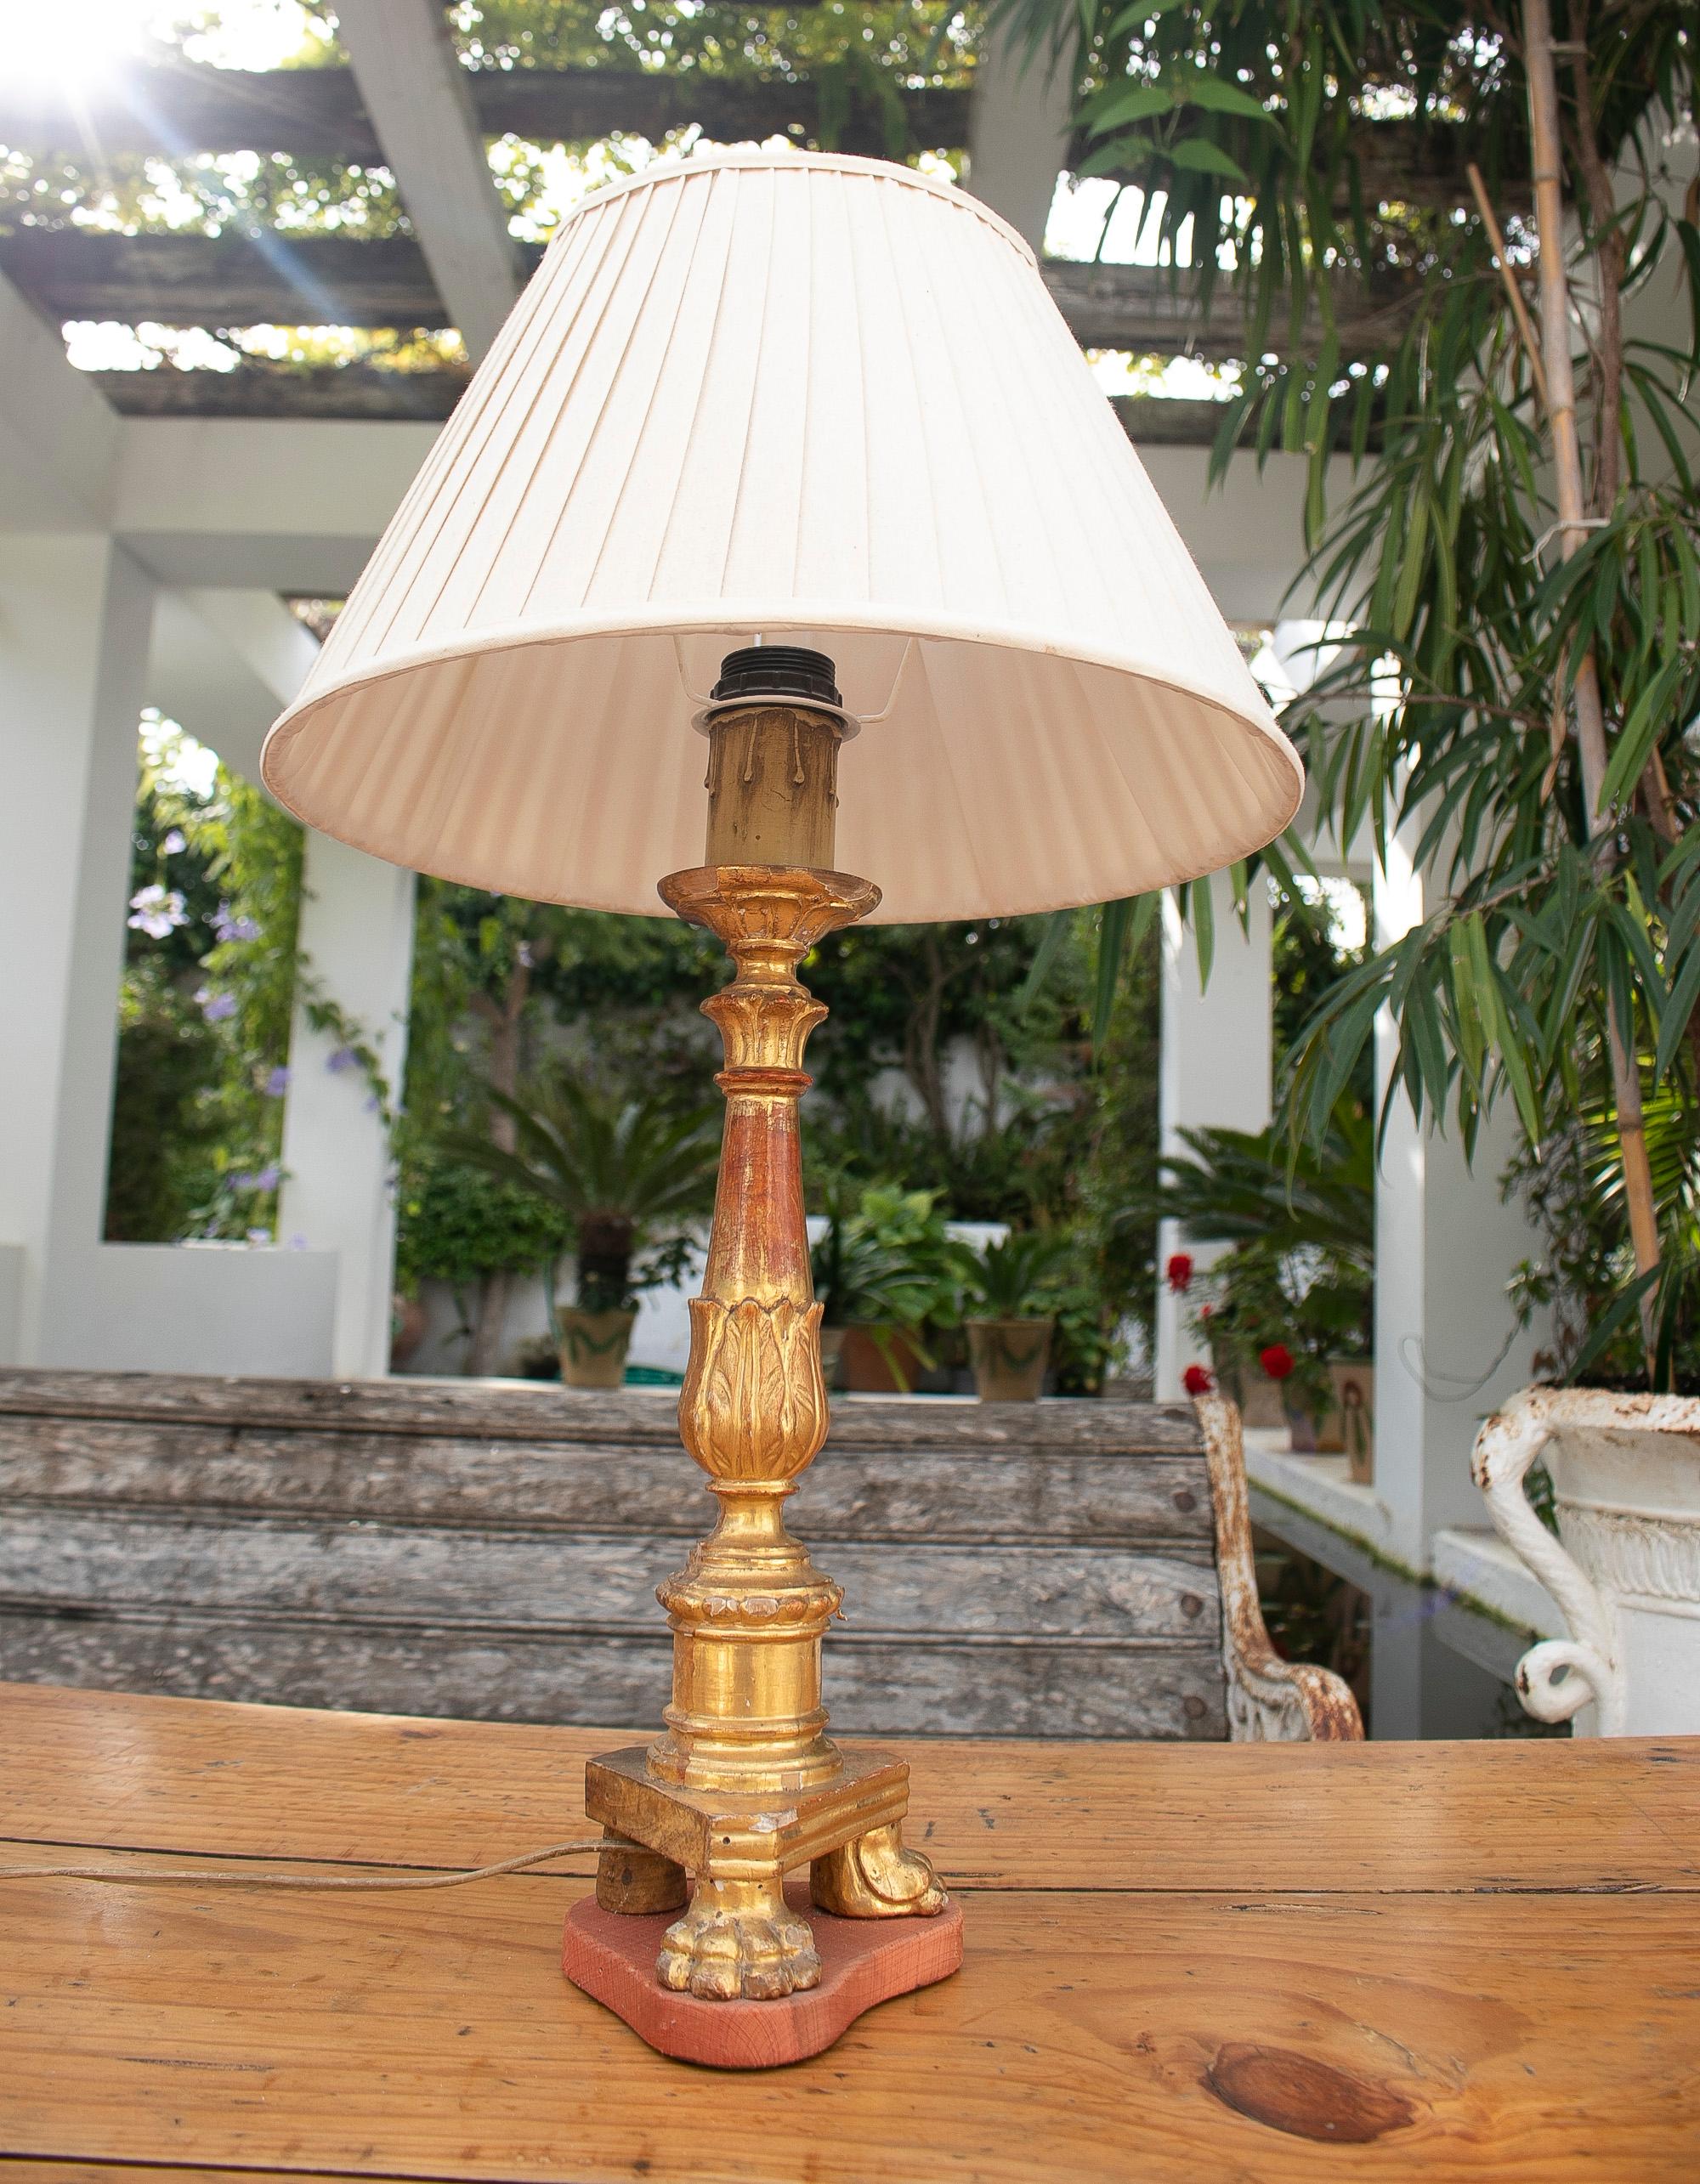 18th century Spanish table lamp with gilded candel holder and claw feet

Lampshade not included in the price.